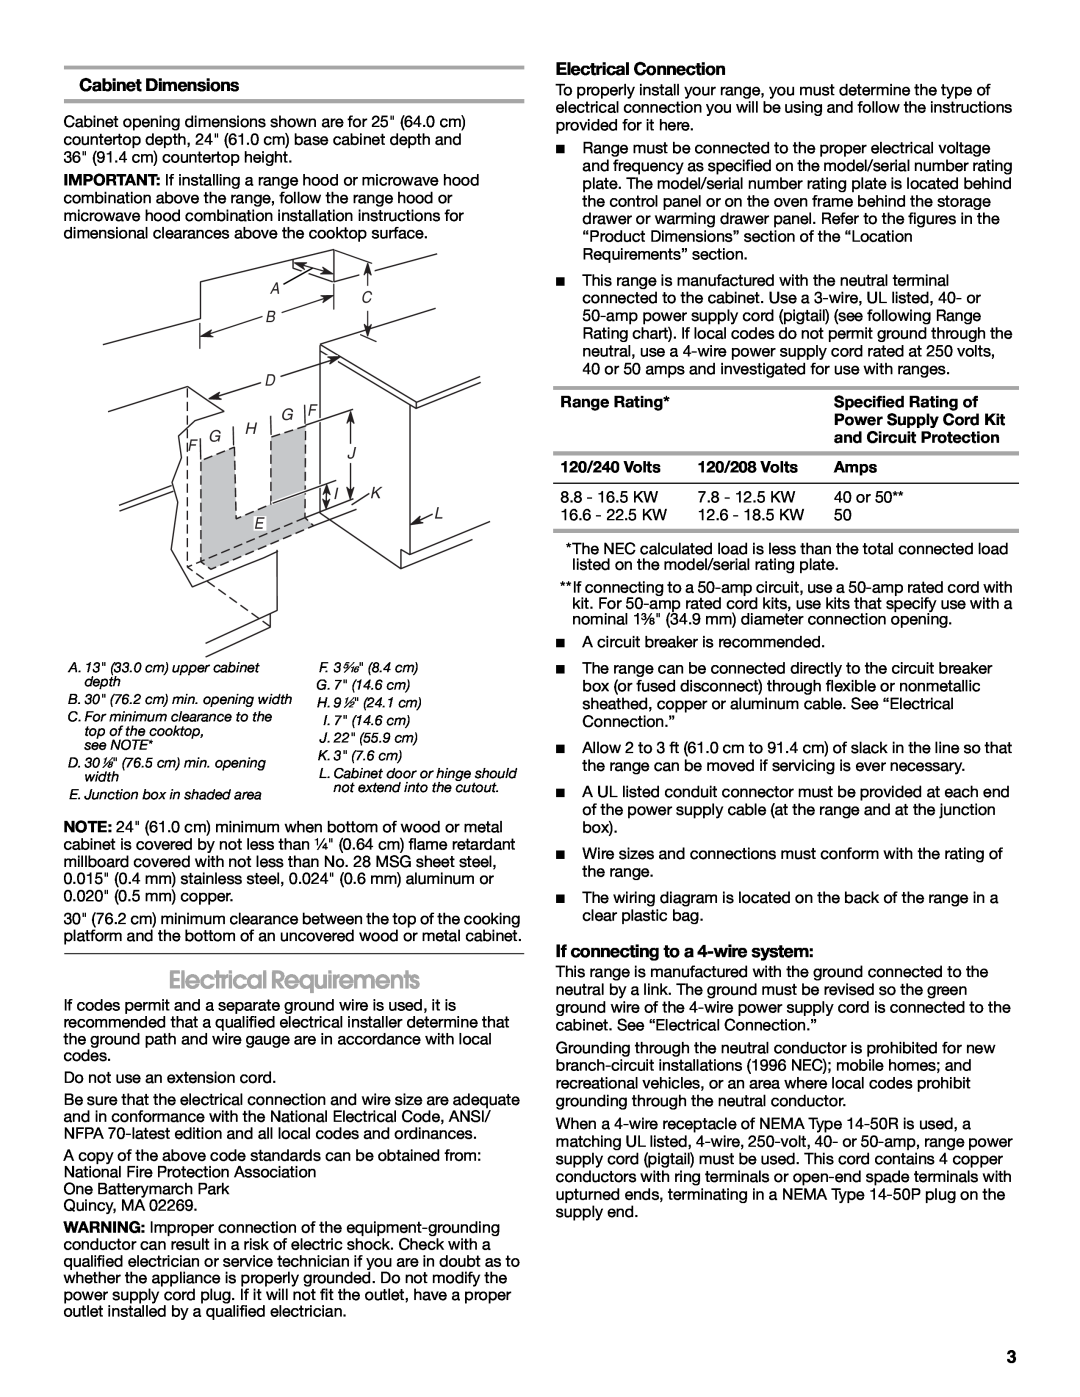 Whirlpool W10258095A Electrical Requirements, Cabinet Dimensions, Electrical Connection, If connecting to a 4-wire system 